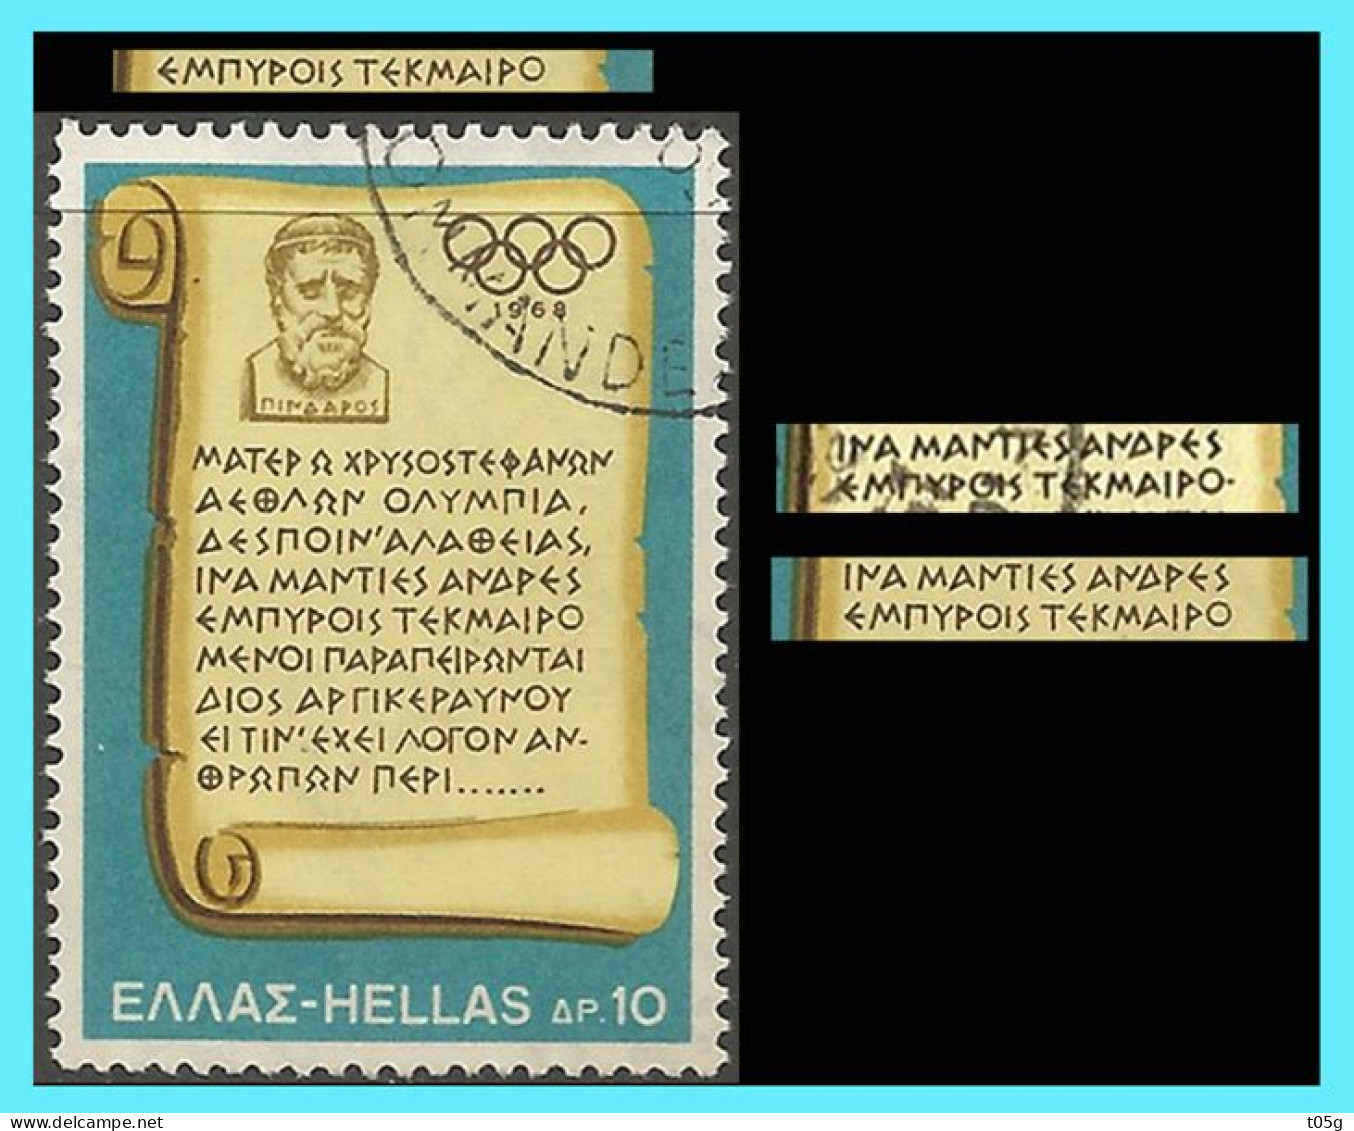 GREECE -GRECE- HELLAS 1968: Stamps (without --) TEKMAIPO Instead Of TEKMAIPO-- "Olympic Games Mexico" - Used Stamps